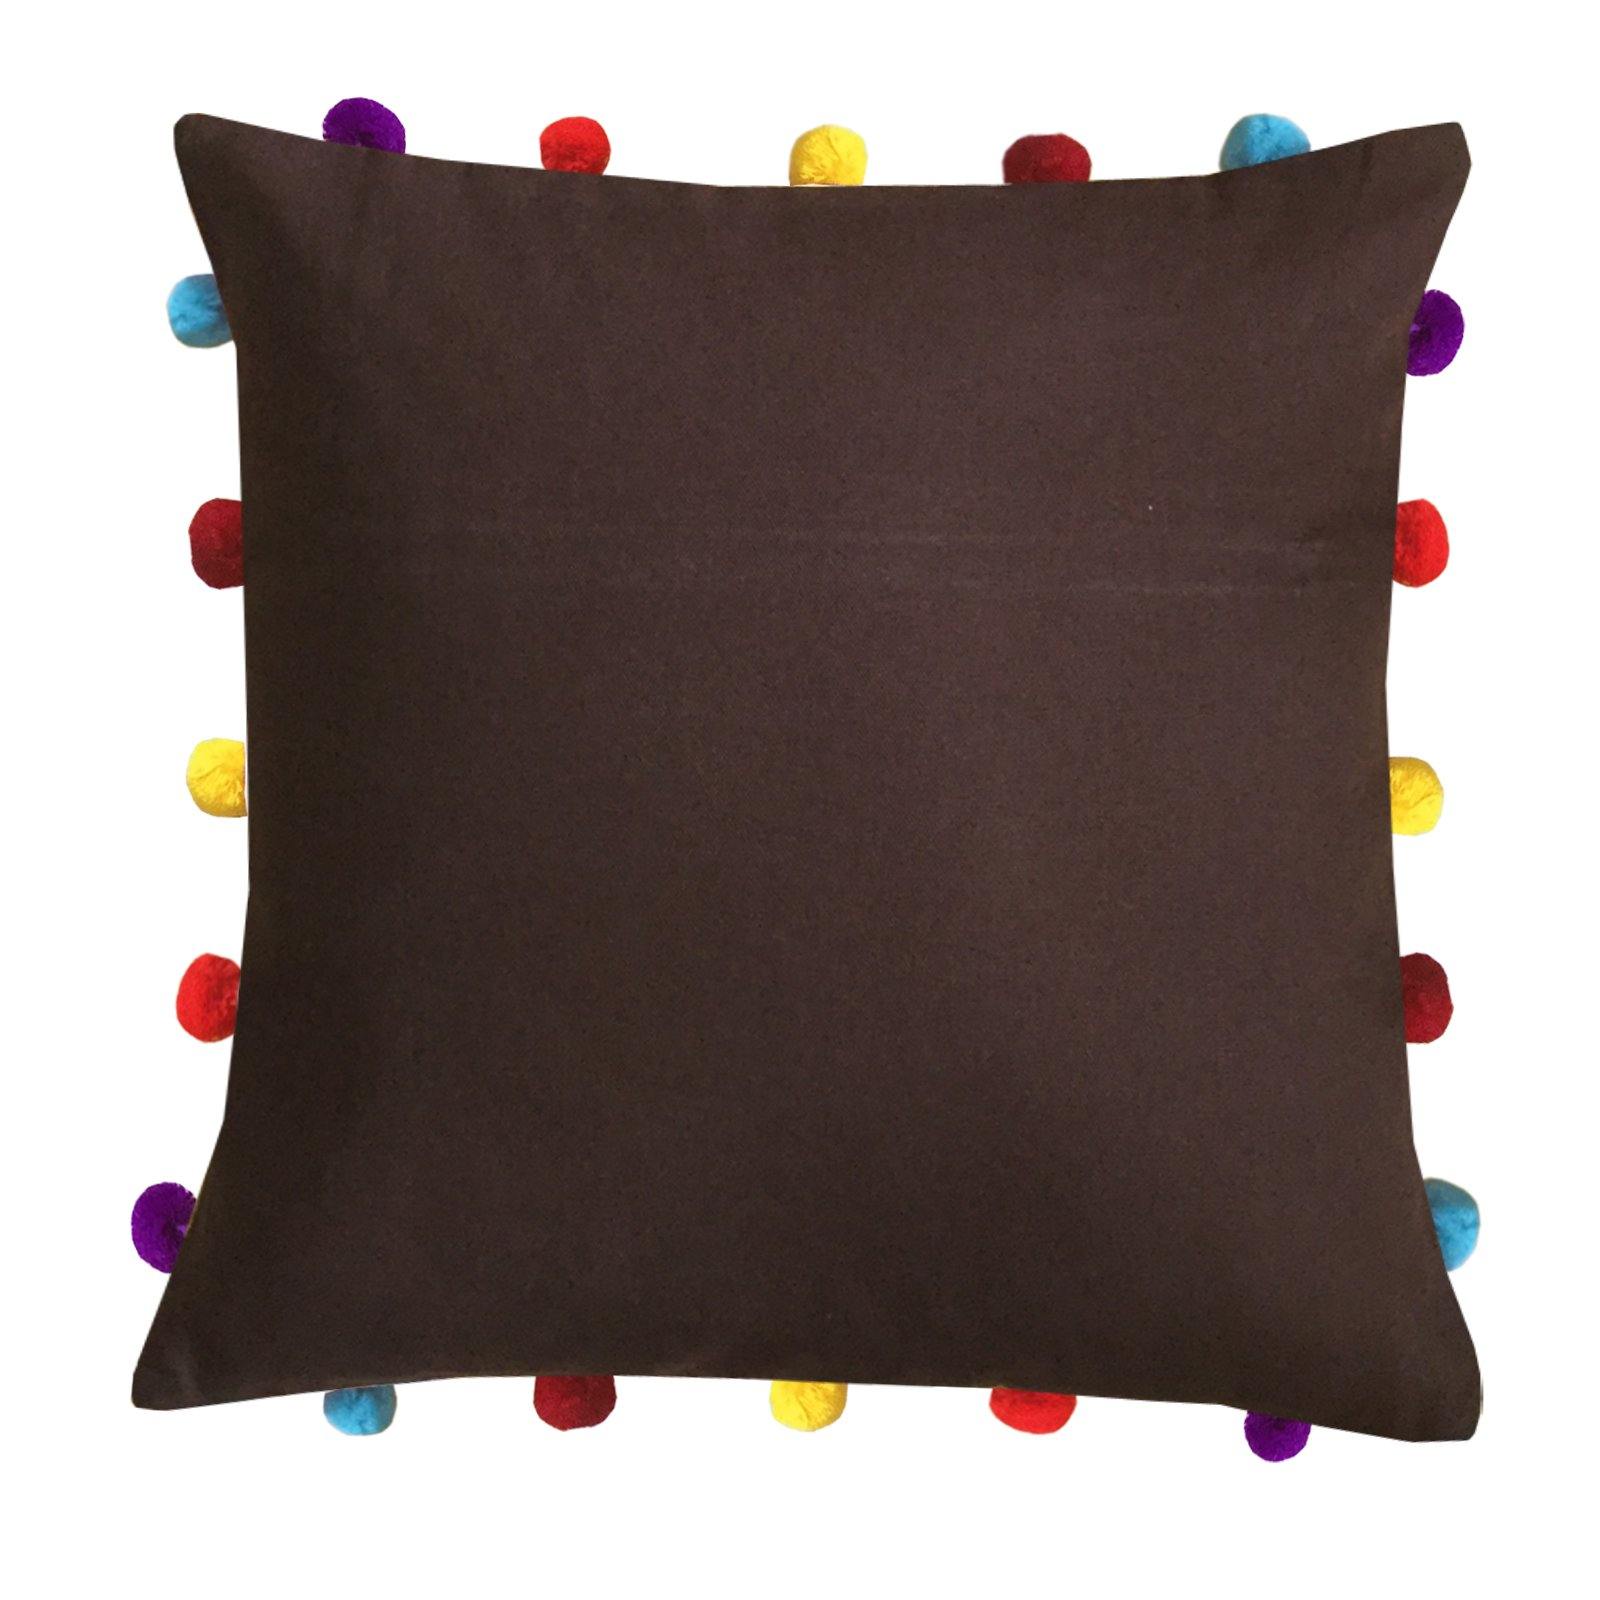 Lushomes French Roast Cushion Cover with Colorful pom poms (Single pc, 16 x 16”) - Lushomes